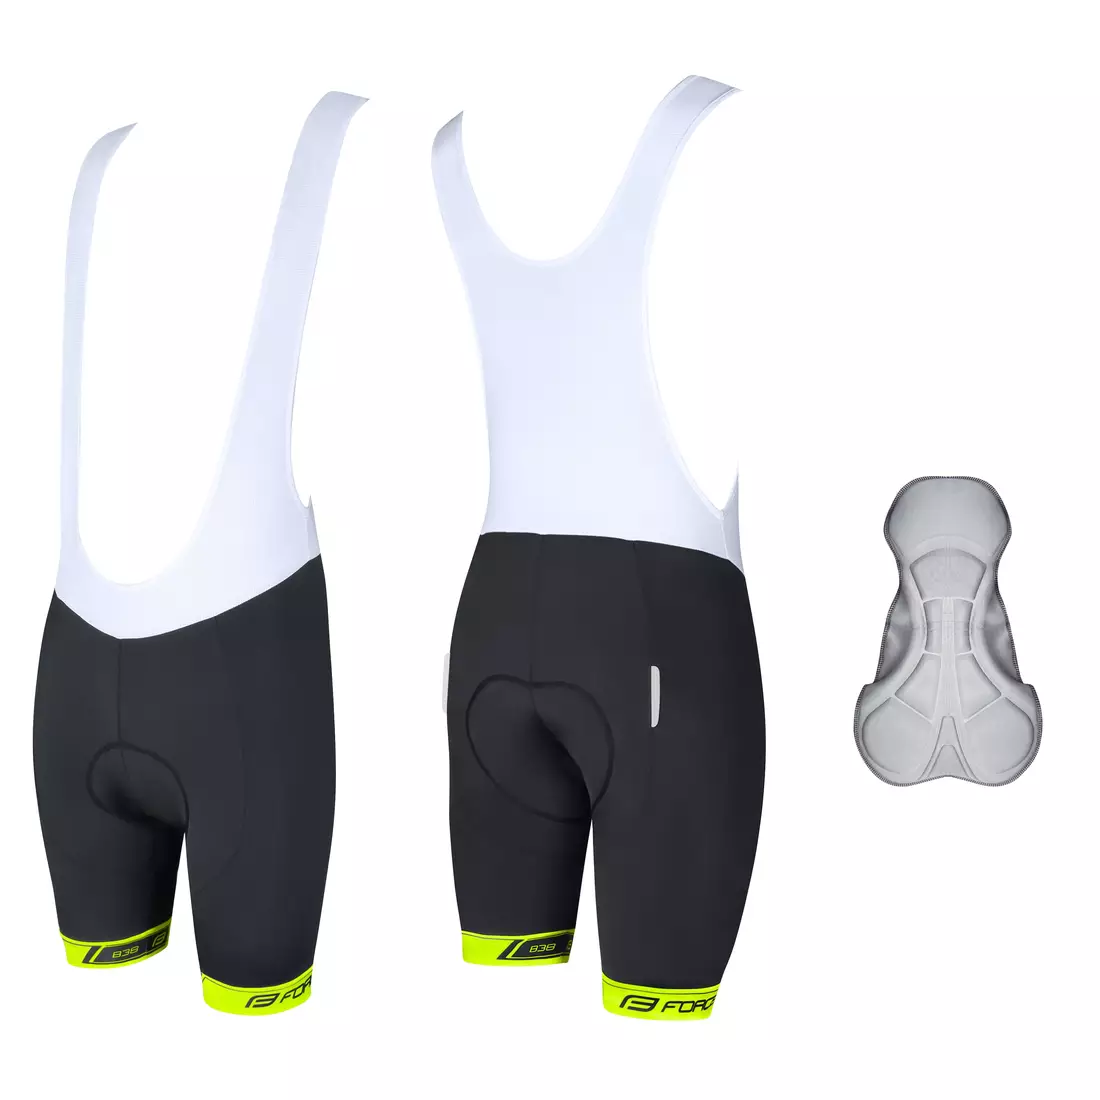 FORCE B38 Cycling shorts with an insert black